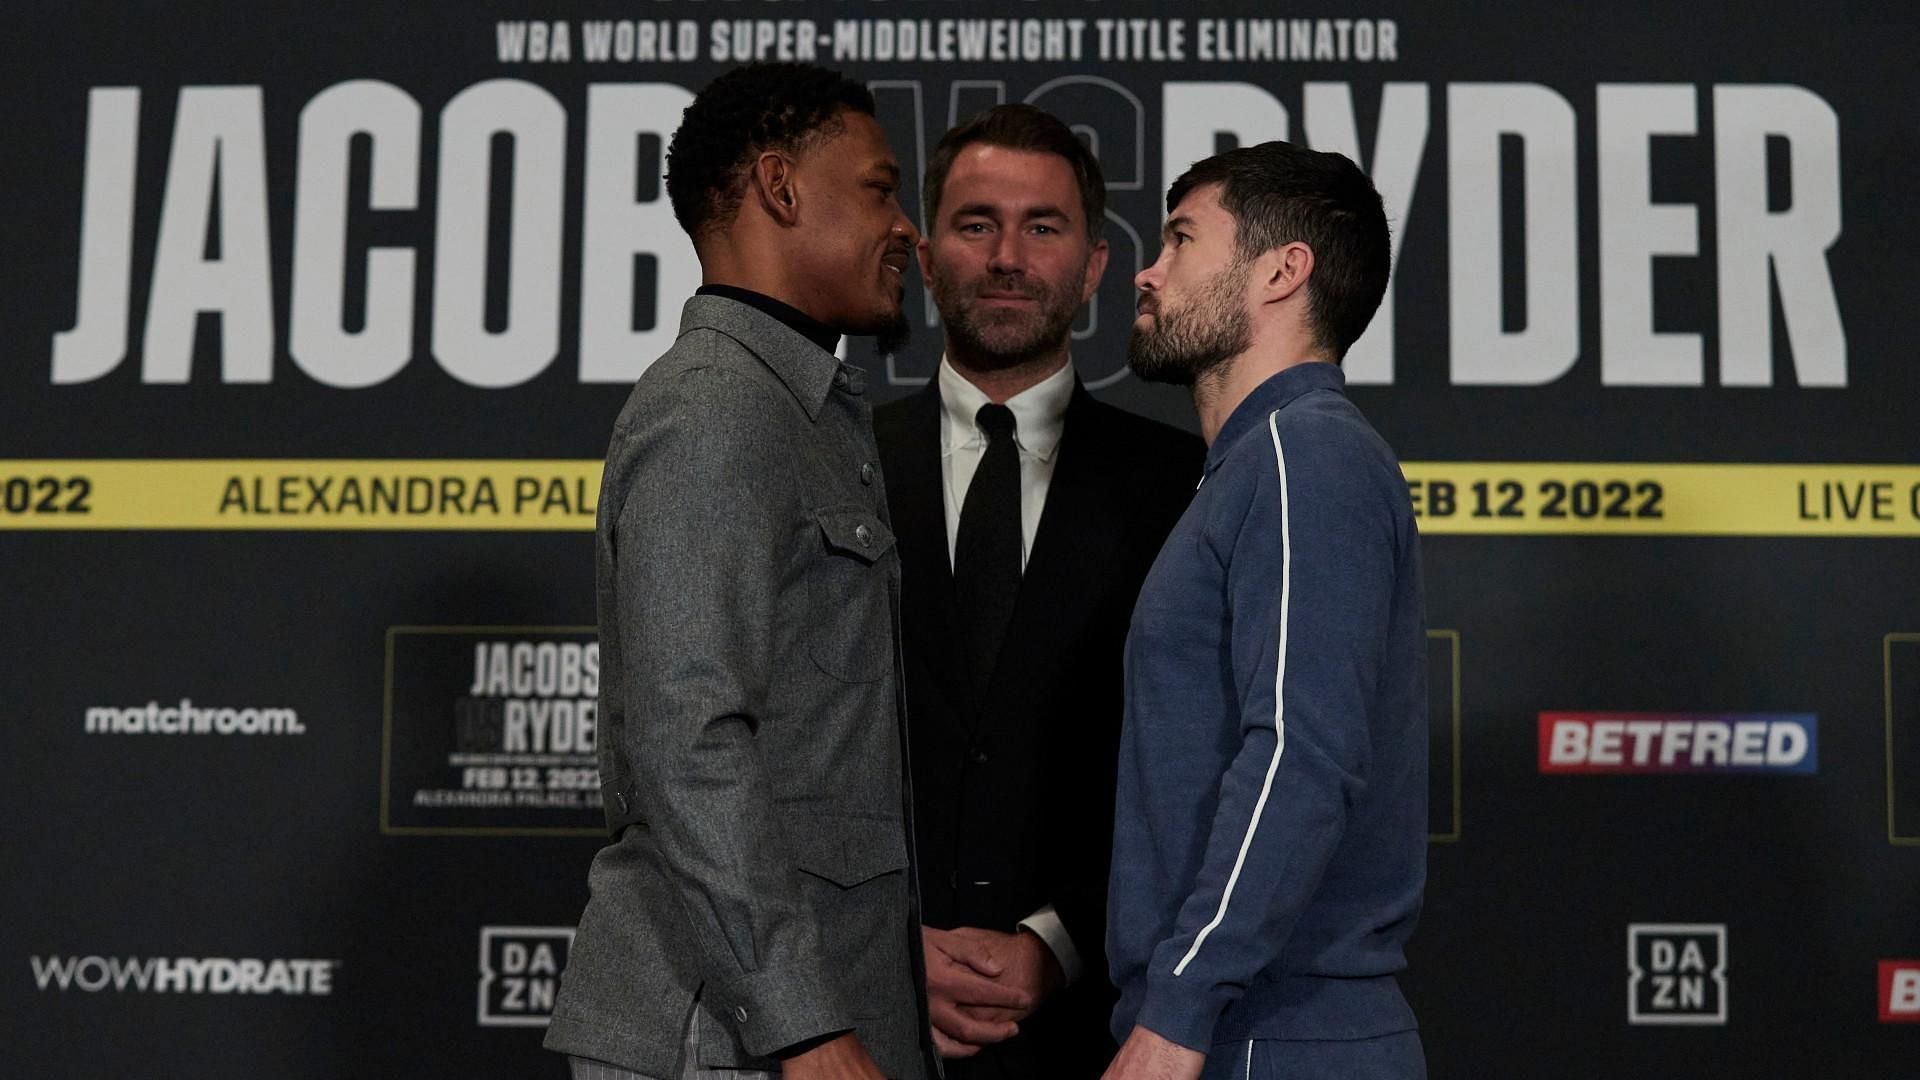 Daniel Jacobs (L) and John Ryder (R) faced off Saturday night in London